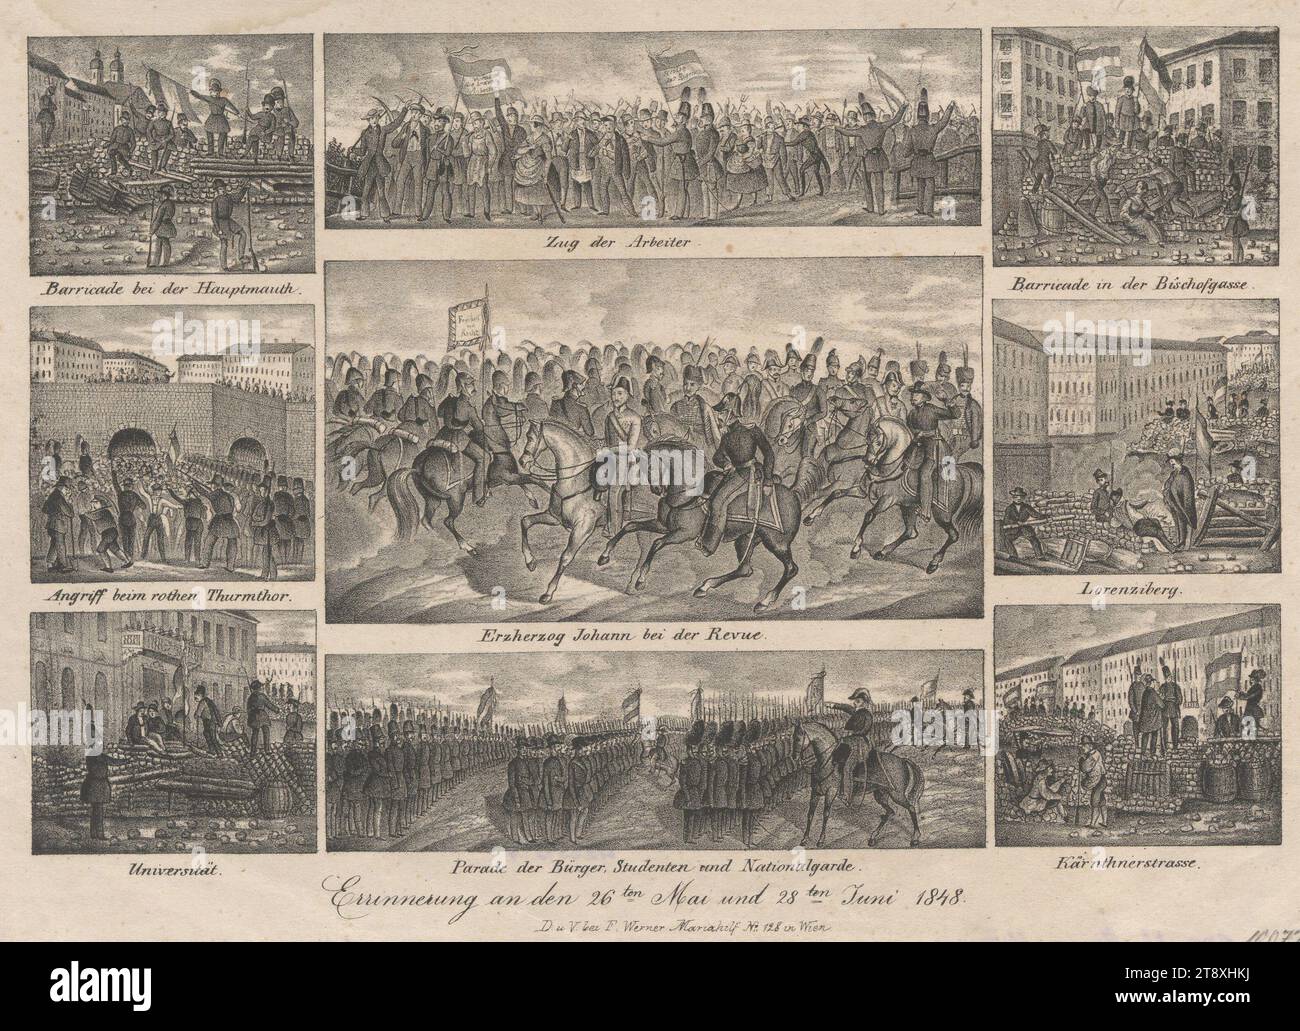 Remembrance of the 26th May and 28th June 1848. (9 depictions: 'Barricade at the Hauptmauth.', 'Procession of workers.', 'Barricade in the Bischofgasse.', 'Attack at the rothen Thurmthor.', 'Archduke Johann at the Revue.', 'Lorenziberg.', 'University.', 'Parade of citizens, students and national guard.', 'Kärnthnerstrasse. '), Franz Werner, publisher, 1848, paper, chalk lithograph, height 27.3 cm, width 38.4 cm, military, fine arts, revolutions of 1848, 1849, workers, roadblocks; barricades, battle, battles in general, roadblocks; barricades, the soldier; the soldier's life. Stock Photo